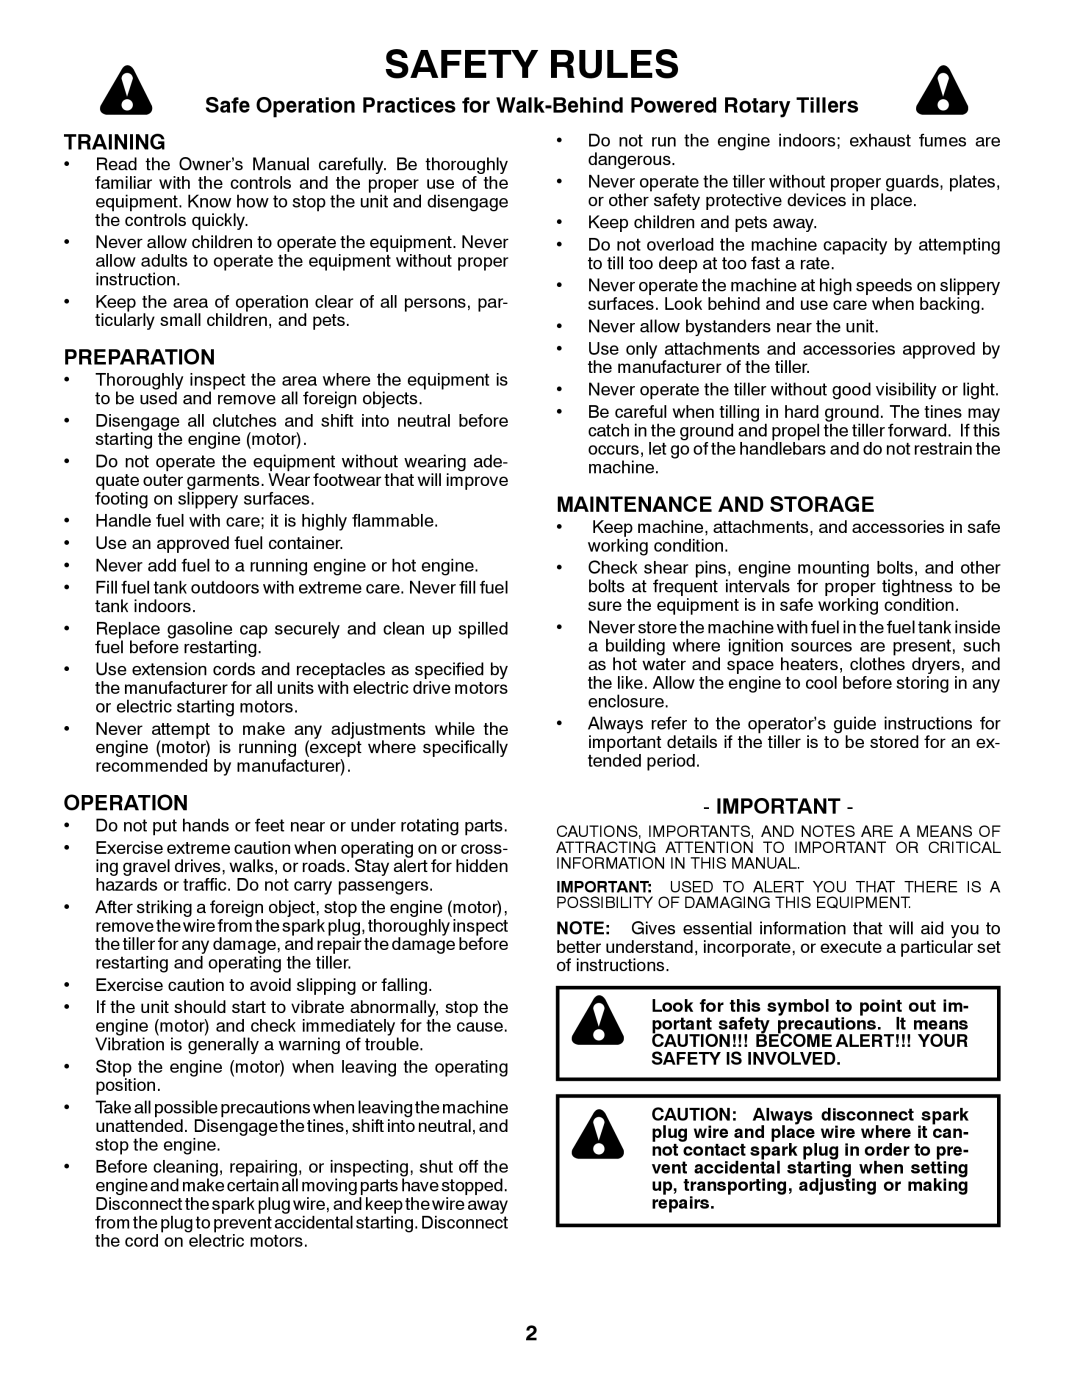 Husqvarna FT900 owner manual Safety Rules, Training, Preparation, Maintenance And Storage, Operation 